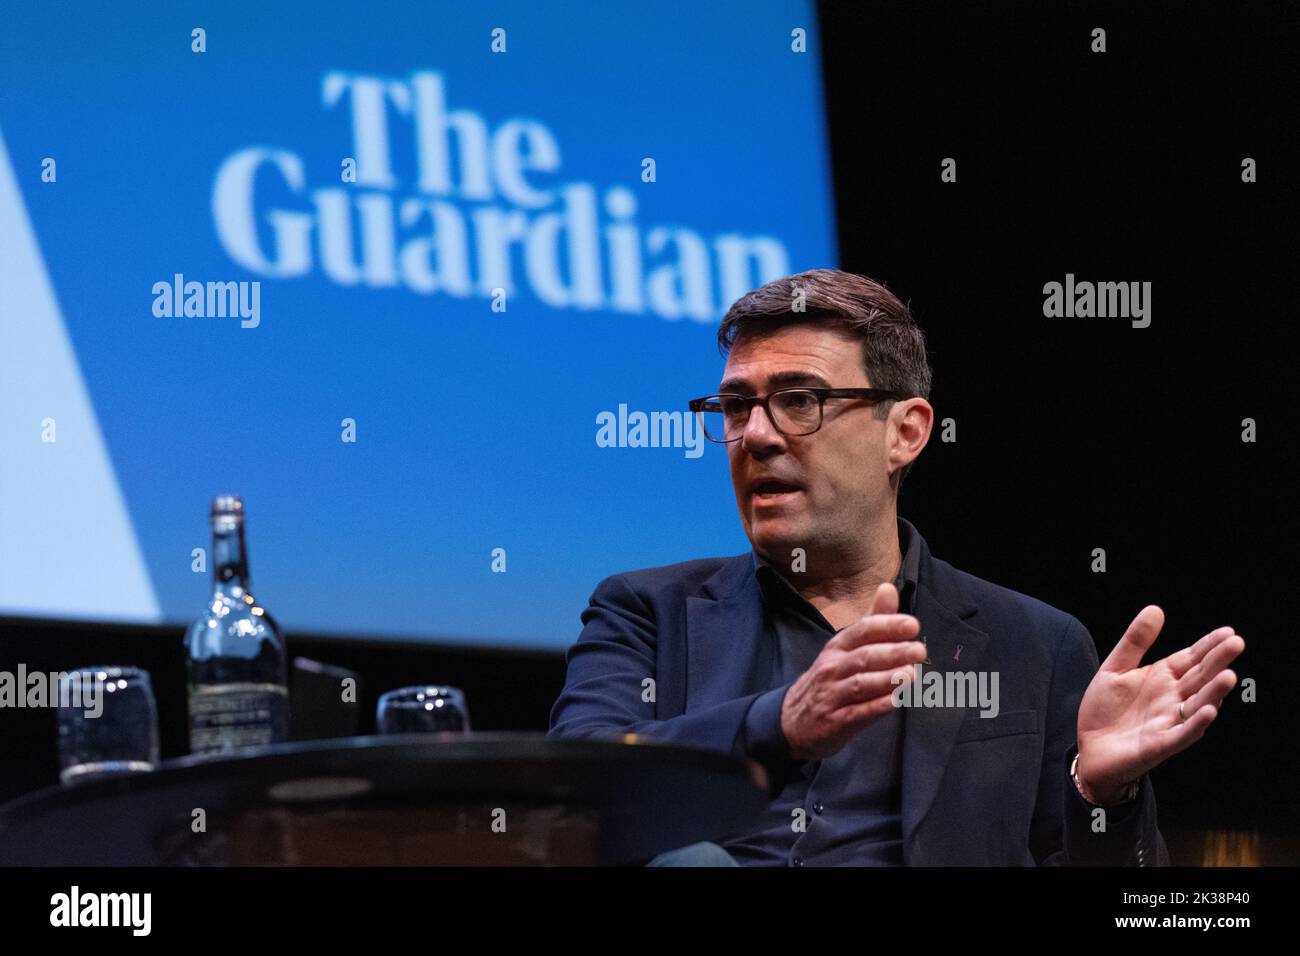 Liverpool, UK. 25th September, 2022. Andy Burnham ( Mayor of Manchester) says nationalising railways ‘a no brainer' at a fringe event with the Guardian Newspaper editor-in-chief, Katharine Vinerat the 2022 Labour Party Conference, which is taking place at the ACC at Kings Dock in Liverpool UK. Picture: garyroberts/worldwidefeatures.com Credit: GaryRobertsphotography/Alamy Live News Stock Photo